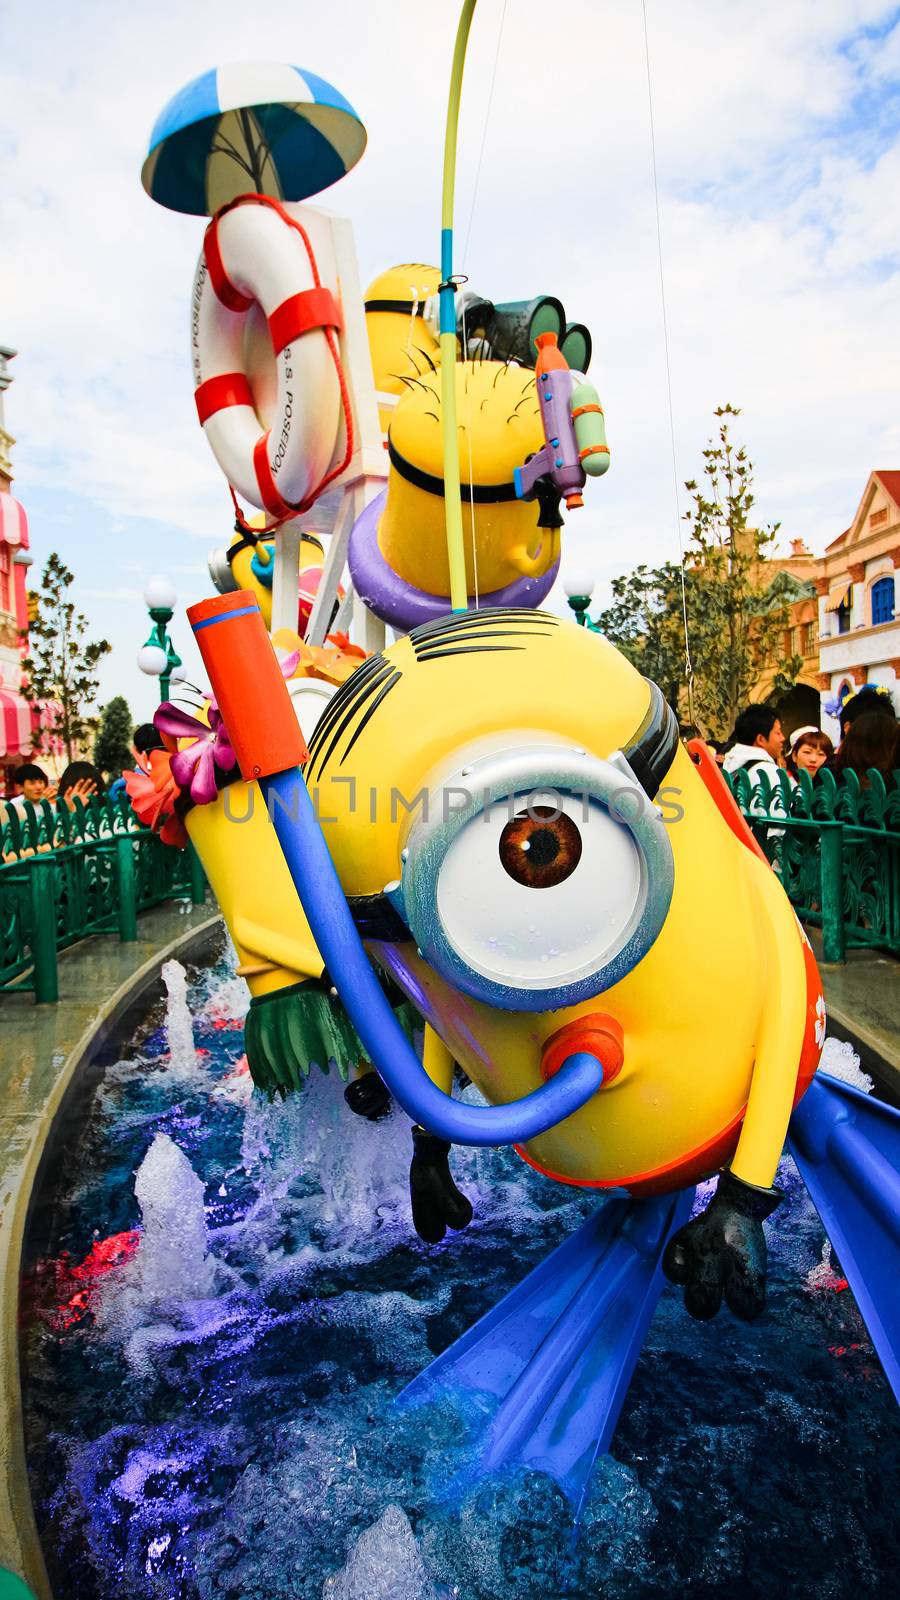 Statue of Minions from Despicable Me Minion Mayhem Movie at Minion Park in Universal Studios JAPAN by USA-TARO